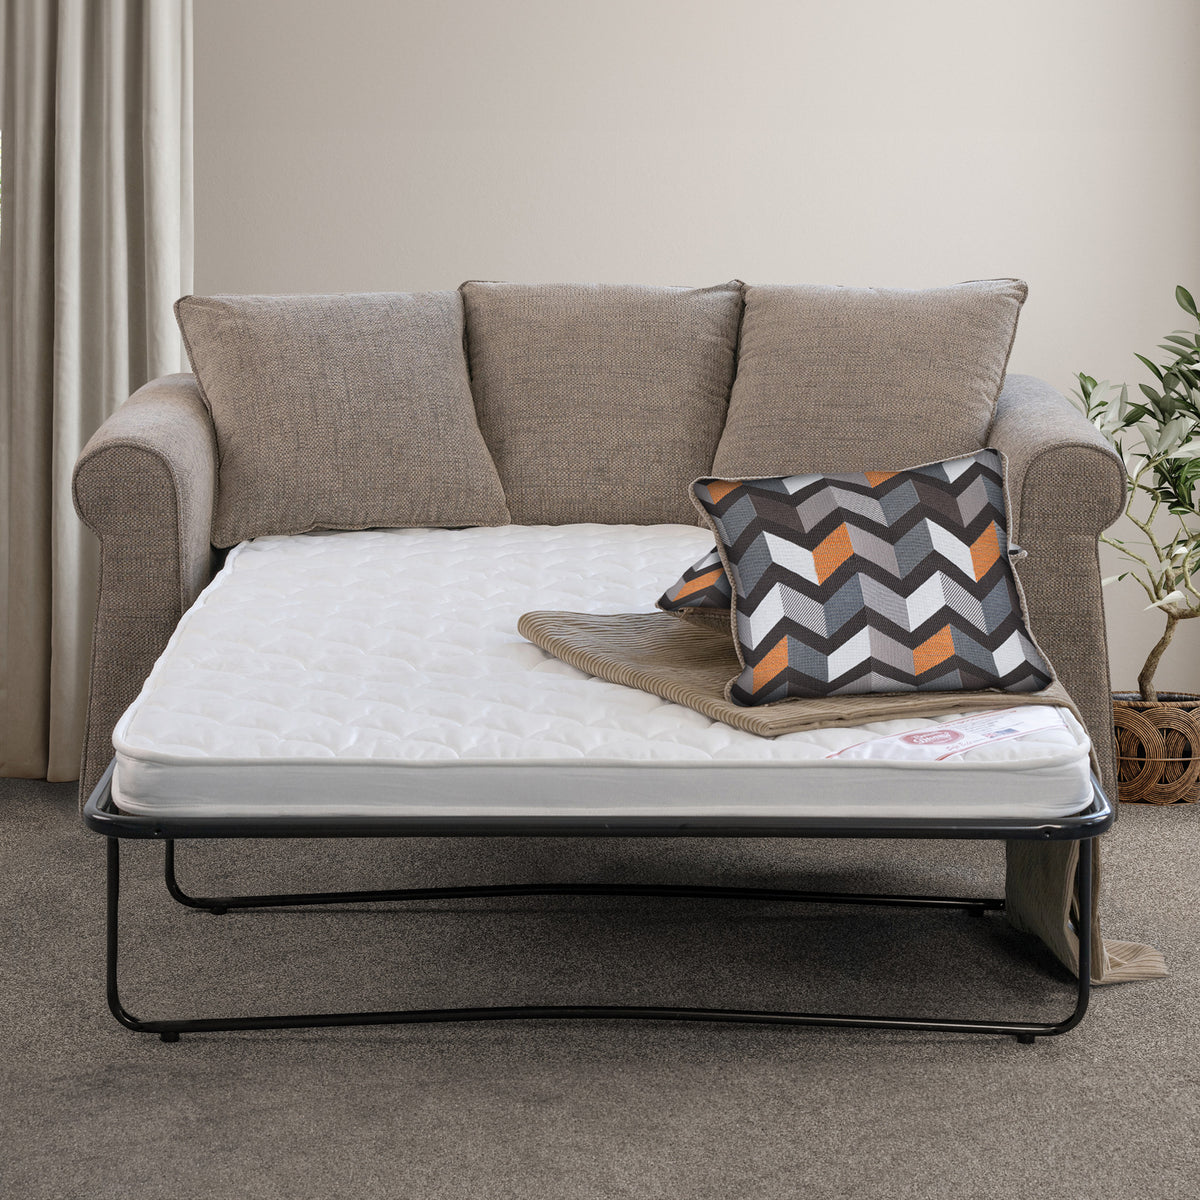 Branston Fawn  Soft Weave 2 Seater Sofabed with Charcoal Scatter Cushions from Roseland Furniture